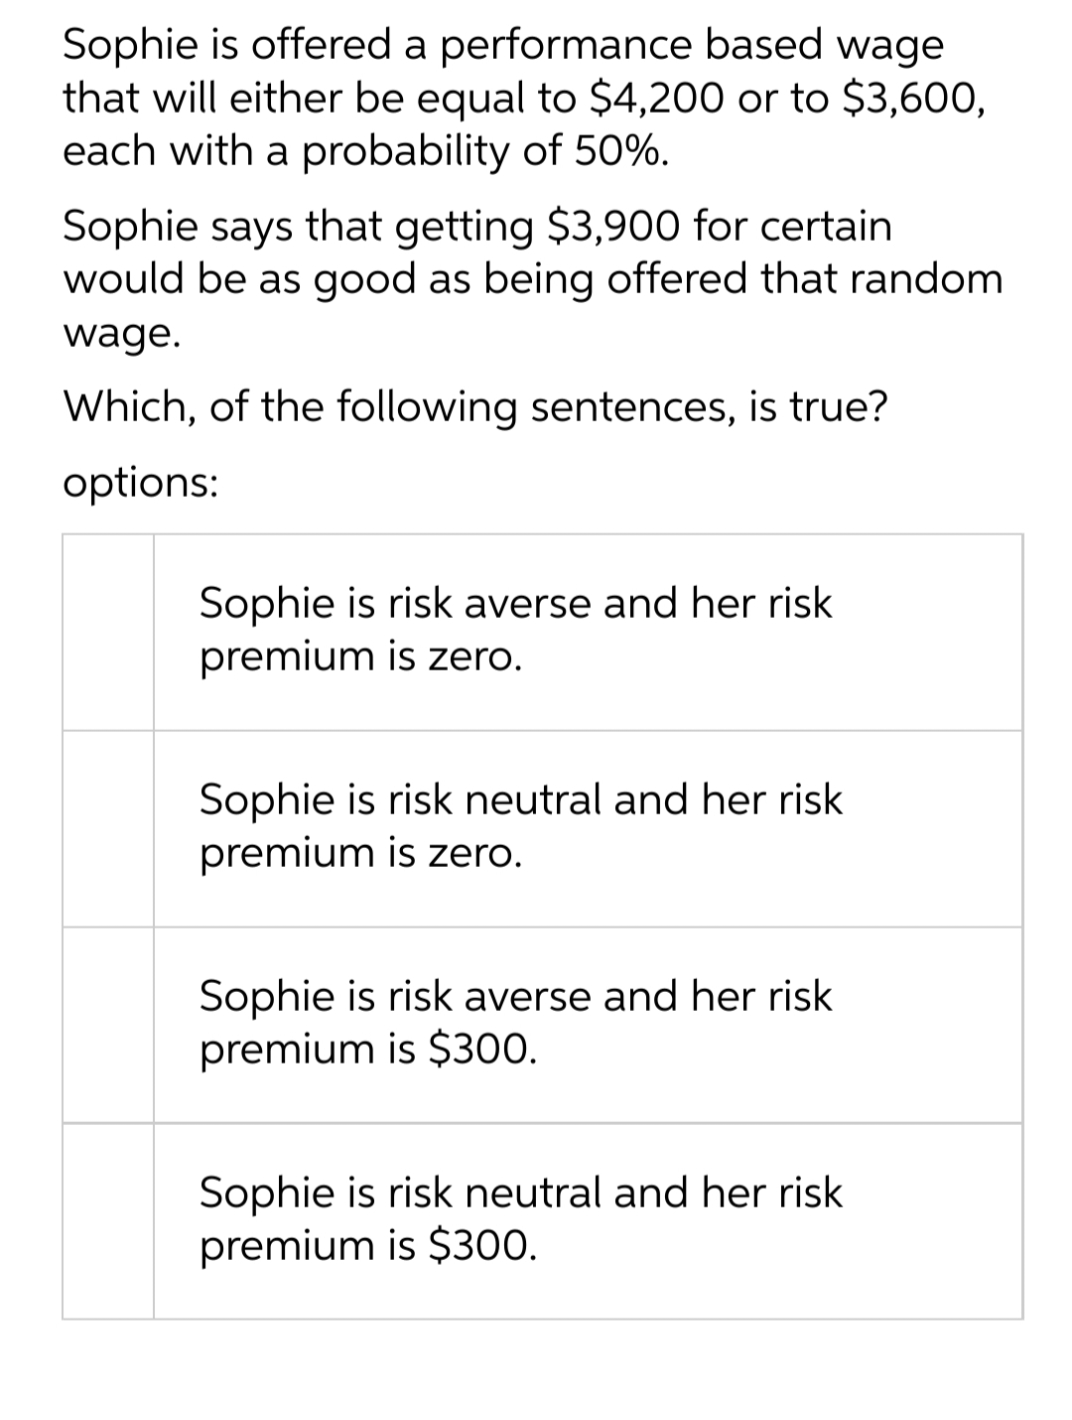 Sophie is offered a performance based wage
that will either be equal to $4,200 or to $3,600,
each with a probability of 50%.
Sophie says that getting $3,900 for certain
would be as good as being offered that random
wage.
Which, of the following sentences, is true?
options:
Sophie is risk averse and her risk
premium is zero.
Sophie is risk neutral and her risk
premium is zero.
Sophie is risk averse and her risk
premium is $300.
Sophie is risk neutral and her risk
premium is $300.
